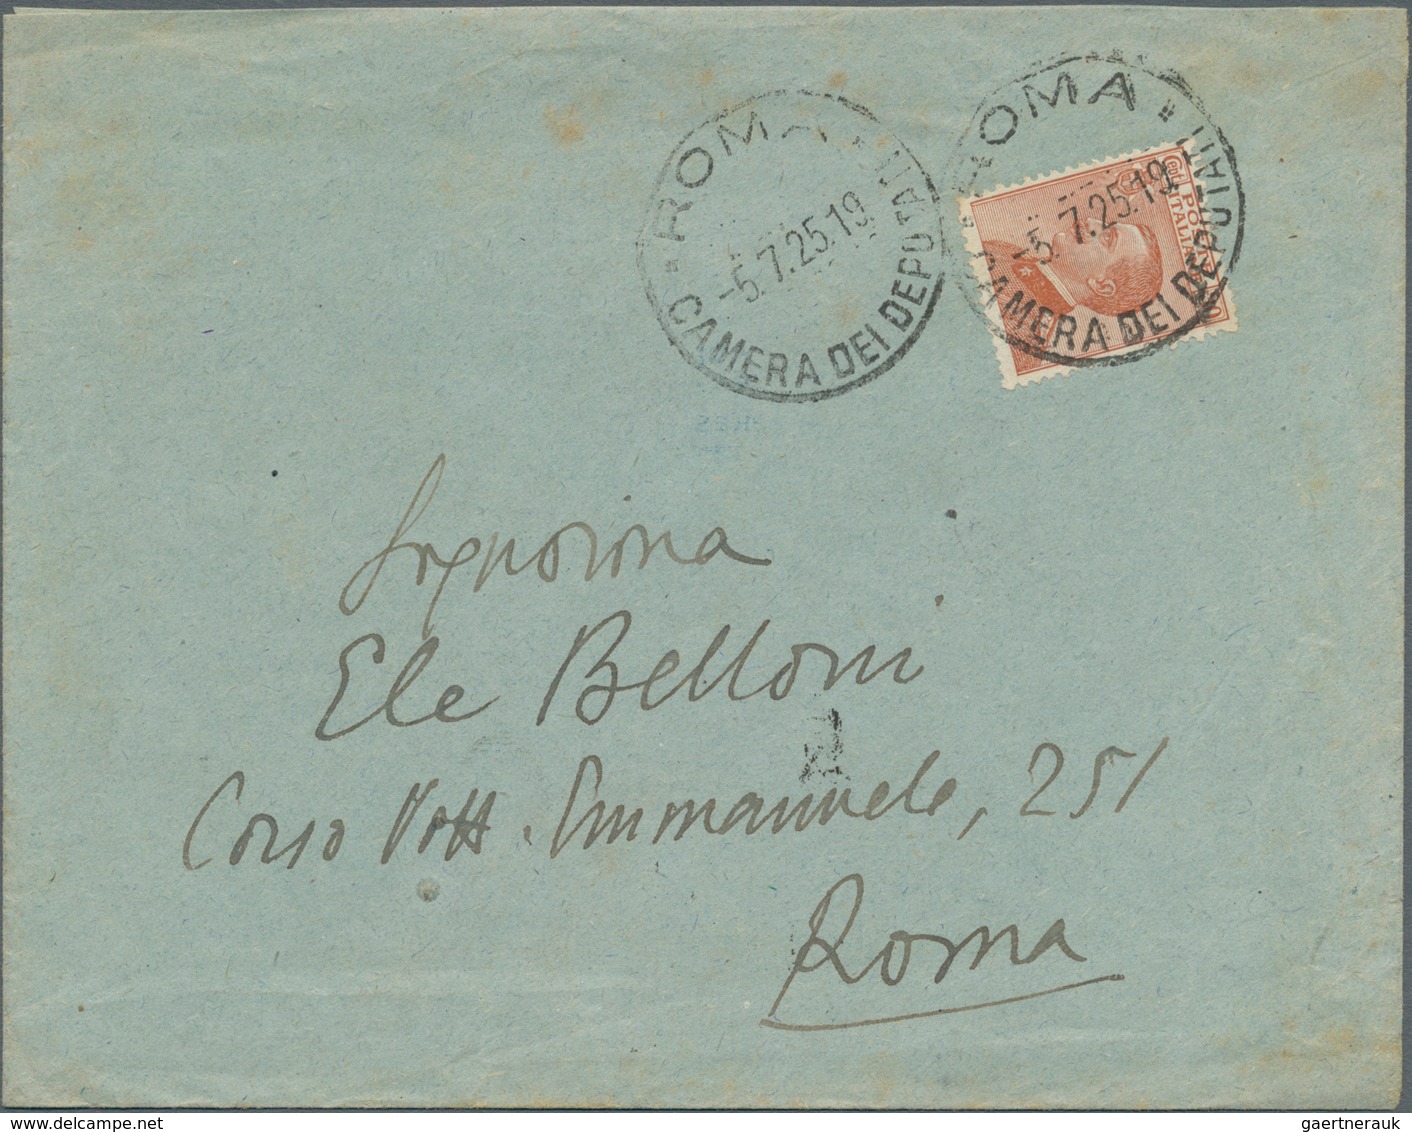 Italien - Stempel: "ROMA CAMERA DEL DEPUTATI" clear on two preprinting covers 1924 and 1925 (one "Il